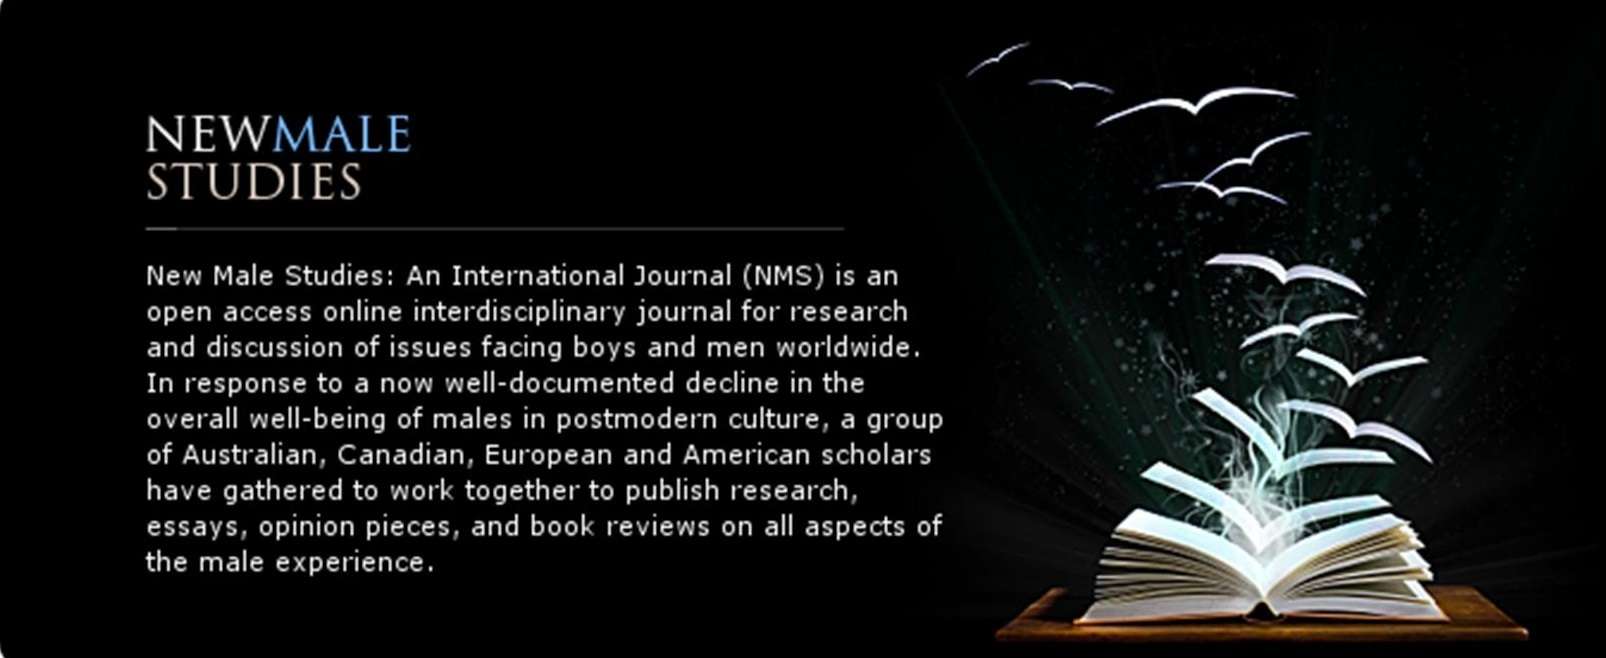 NCFM Member Tim Patten on “Formulating the New Male Studies Curriculum”